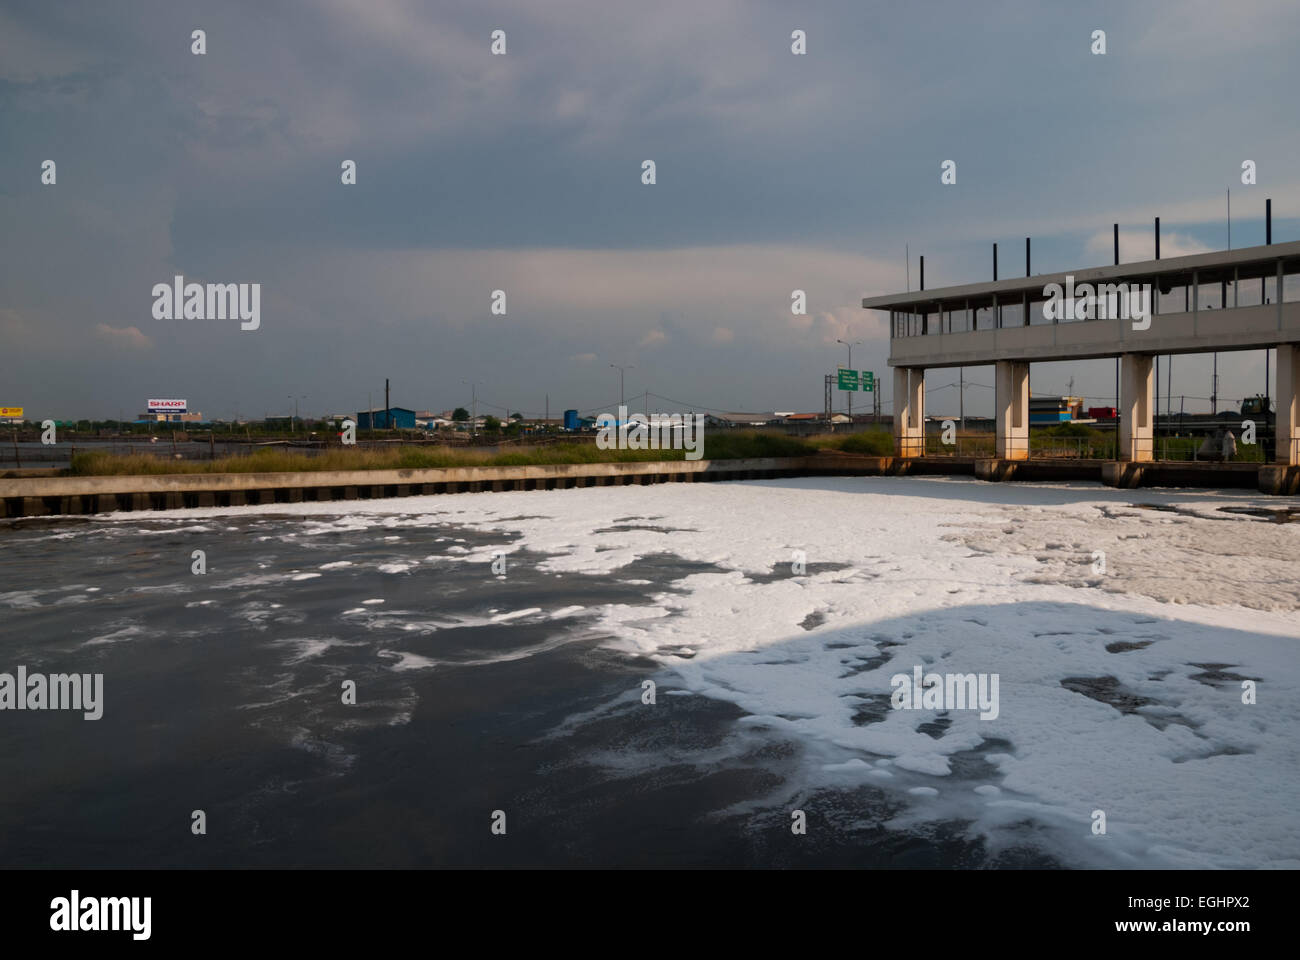 White foams covering a waterway close to a part of the highway leading to Jakarta's Soekarno-Hatta International Airport, in Jakarta coastal area. Stock Photo